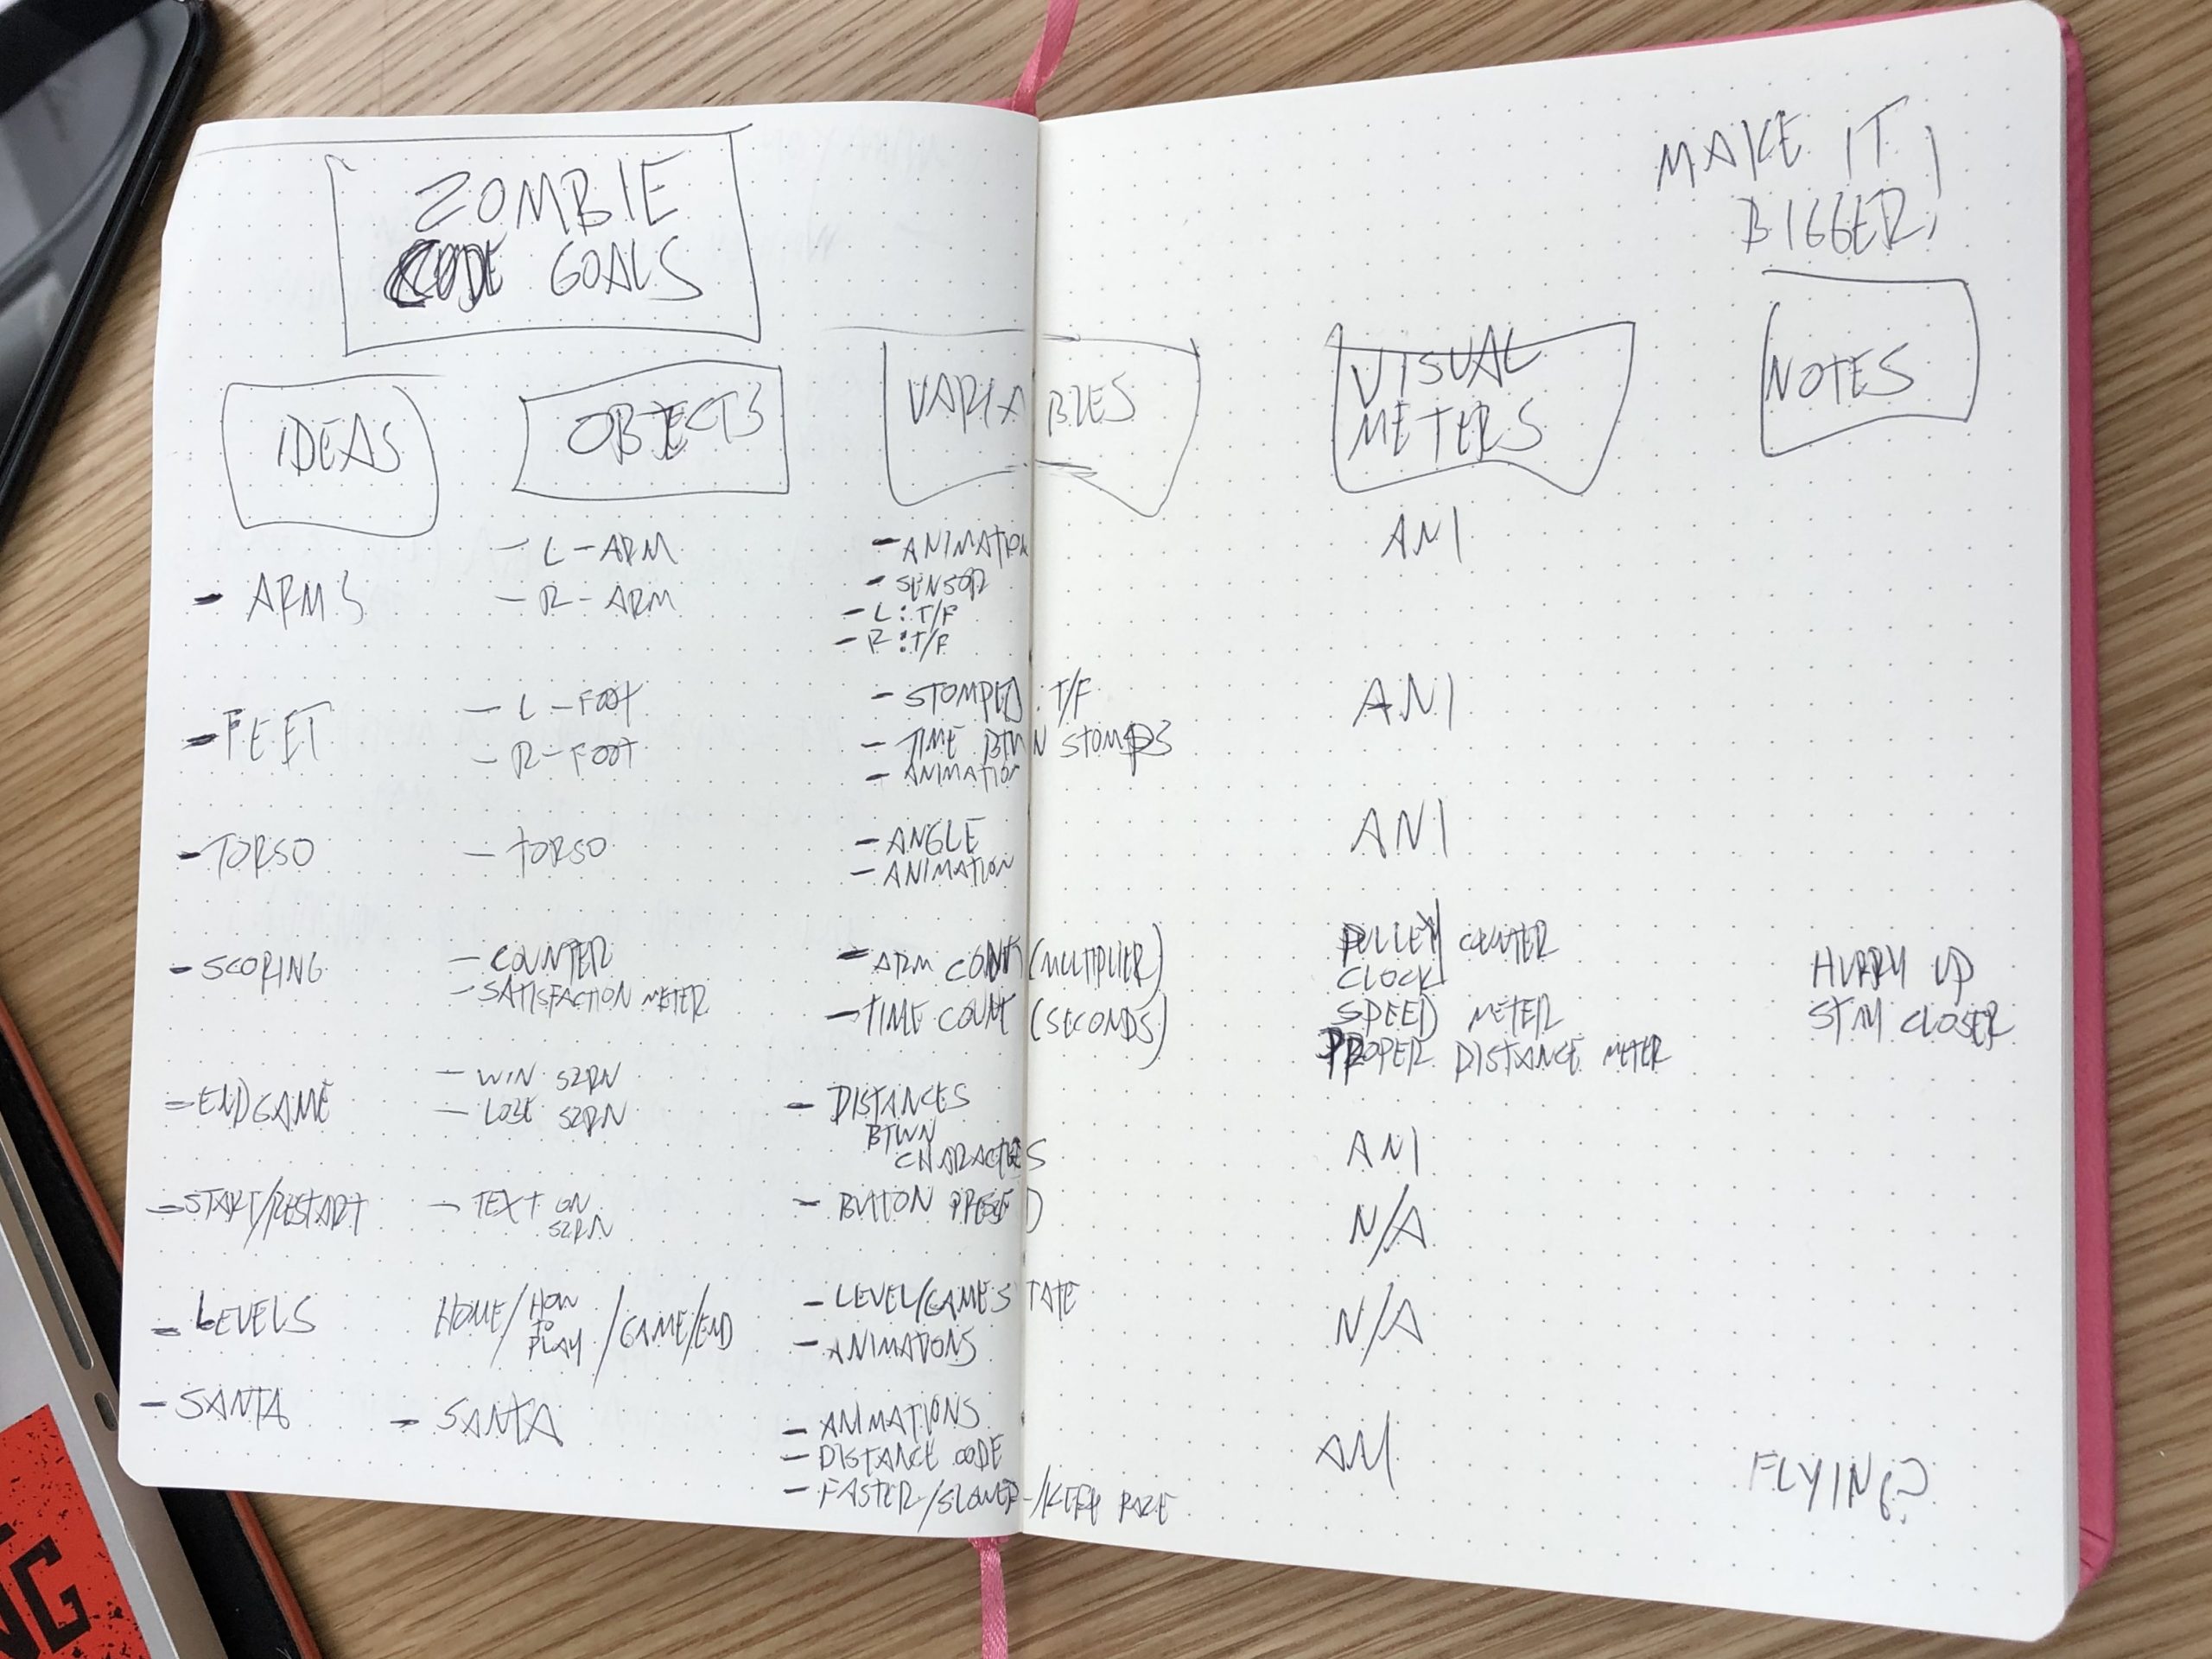 Notes Planning Our Next Steps for Zombie Boot Camp’s programming side